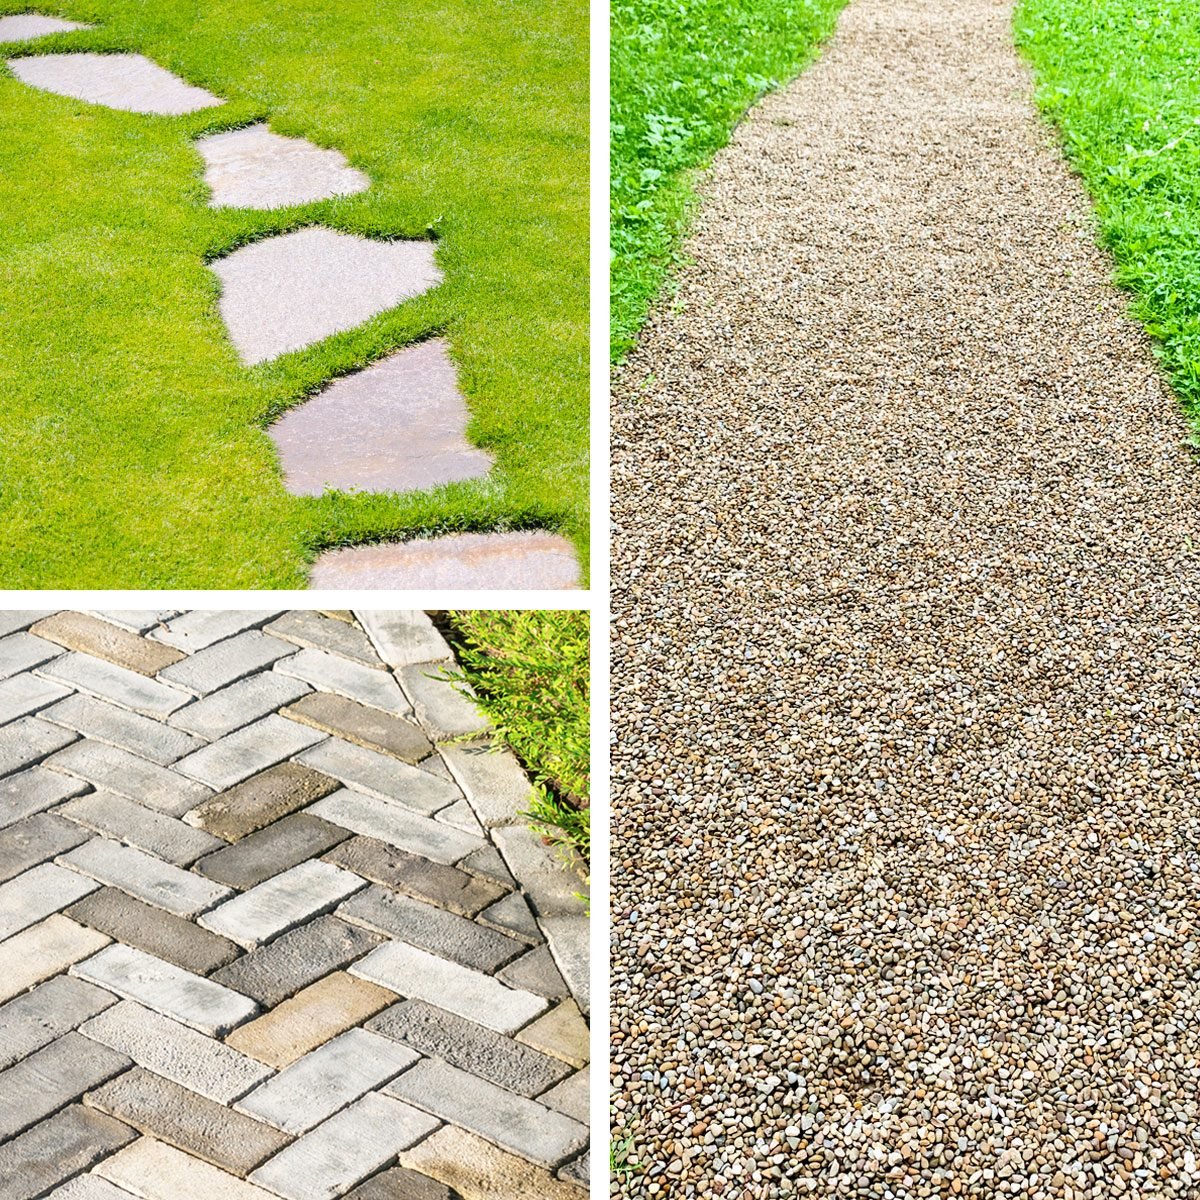 Stone Paths, Pavers or Gravel: Which Type of Garden Path Is Best?